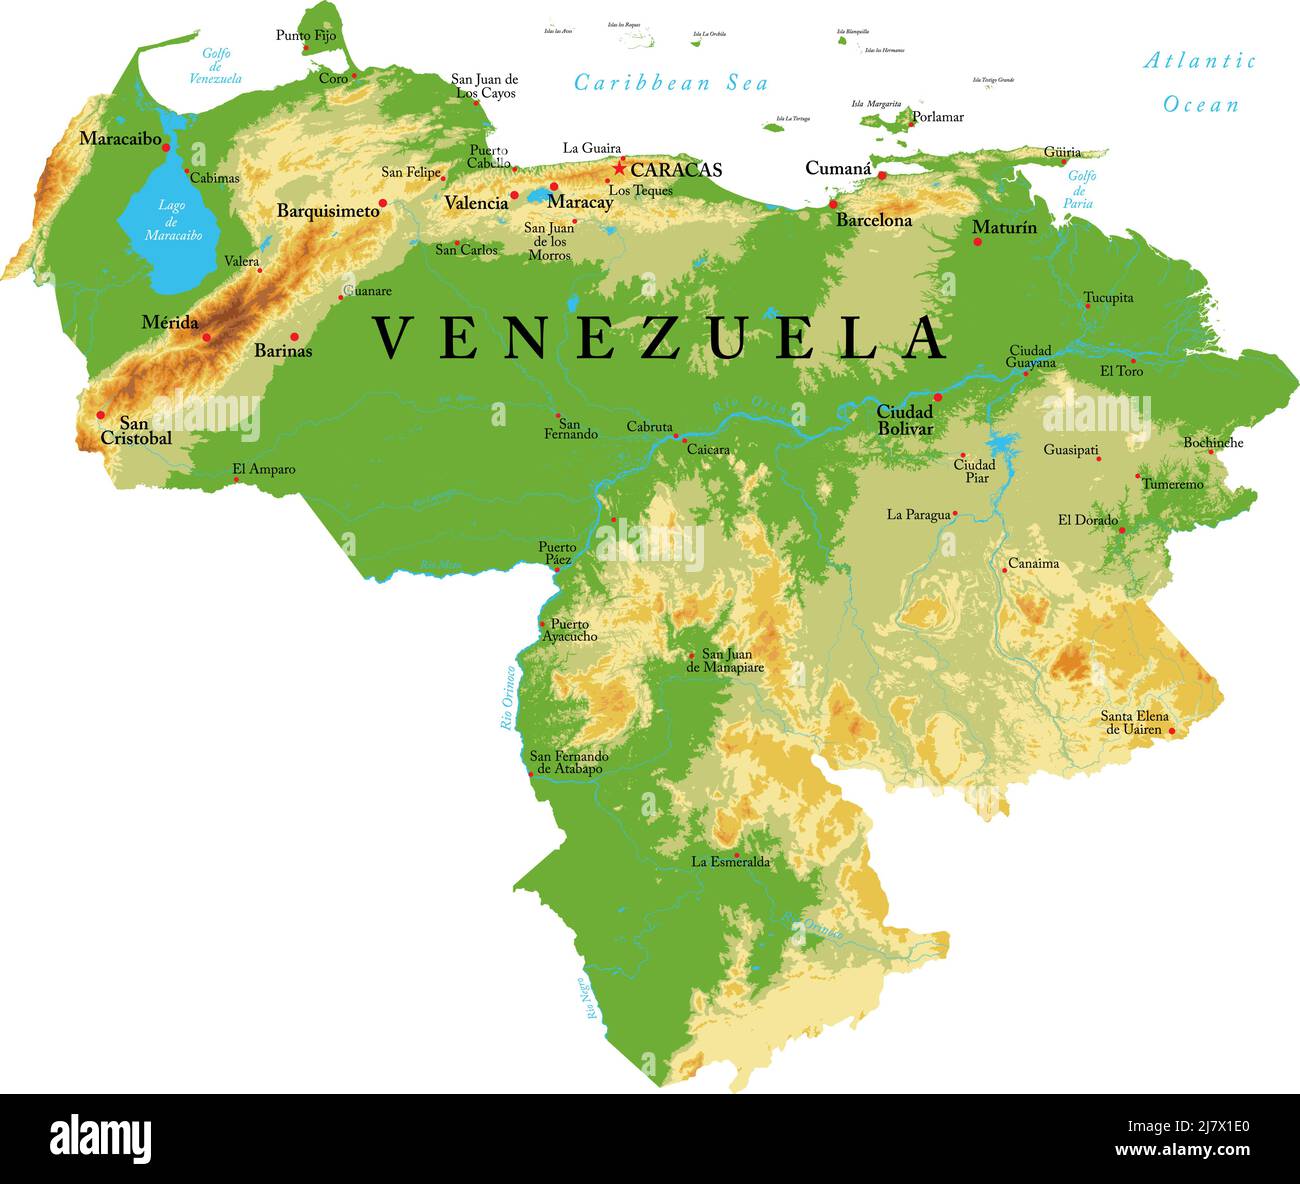 Highly Detailed Physical Map Of Venezuela In Vector Formatwith All The